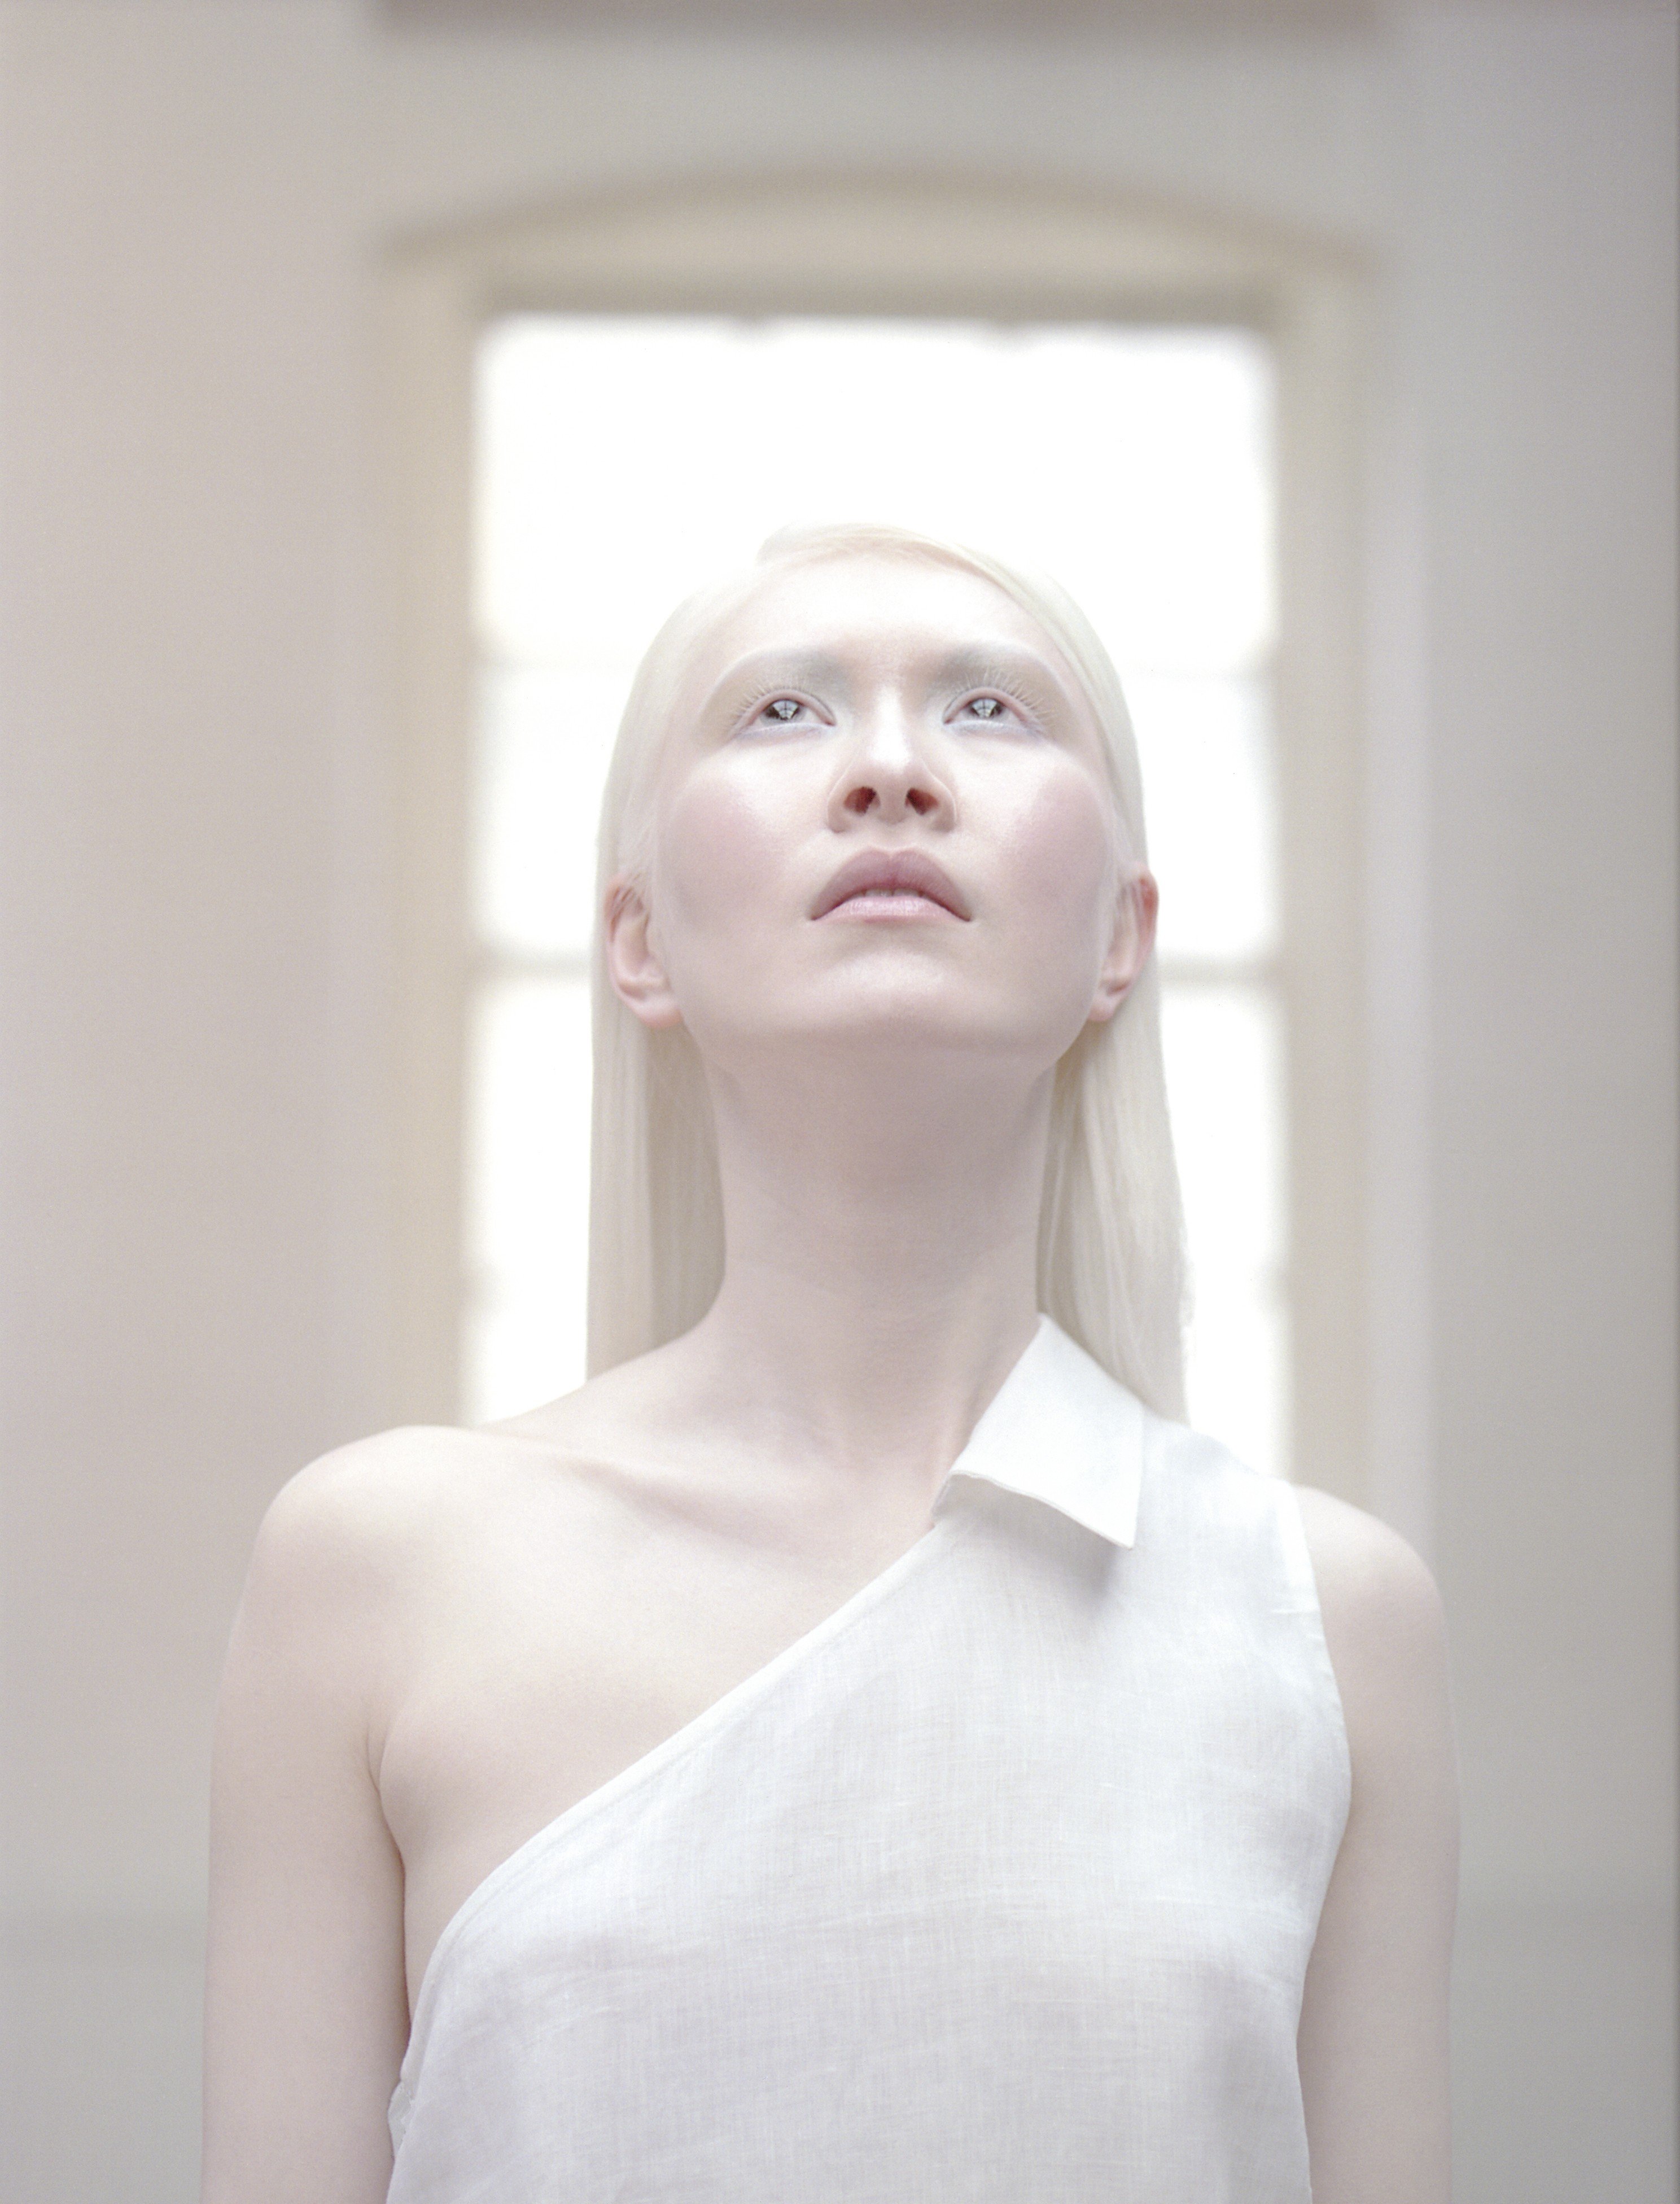 Connie Chiu has been working as a model since the early 1990s. The Hongkonger has albinism meaning she has an absence of pigment in the skin, hair and eyes. Photo: Ellis Parrinder